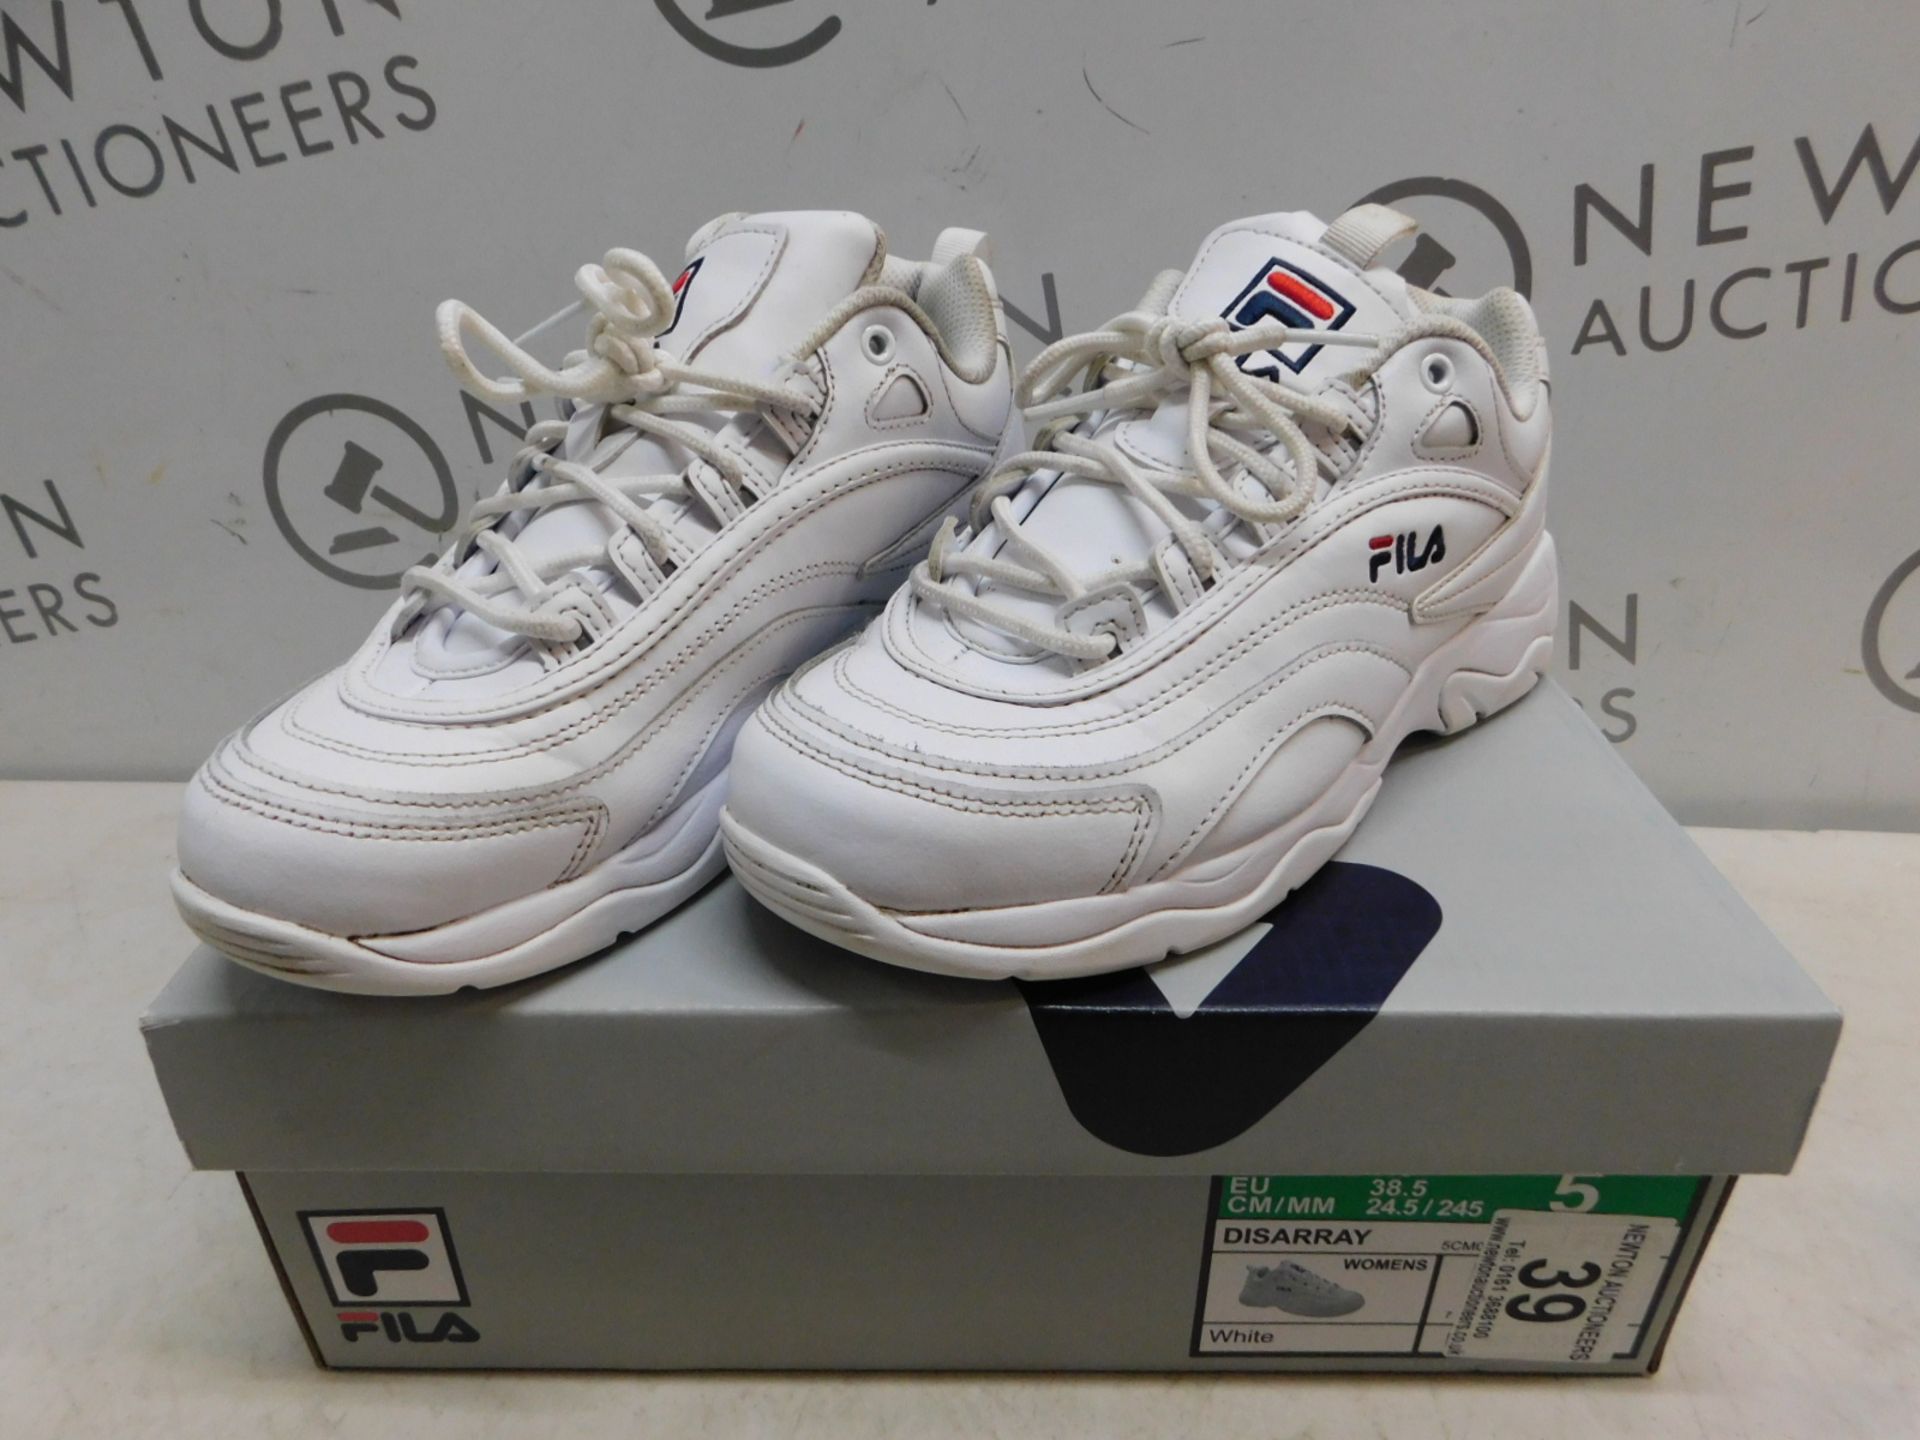 1 BOXED PAIR OF FILA DISARRAY TRAINERS WHITE UK SIZE 5 RRP Â£39.99